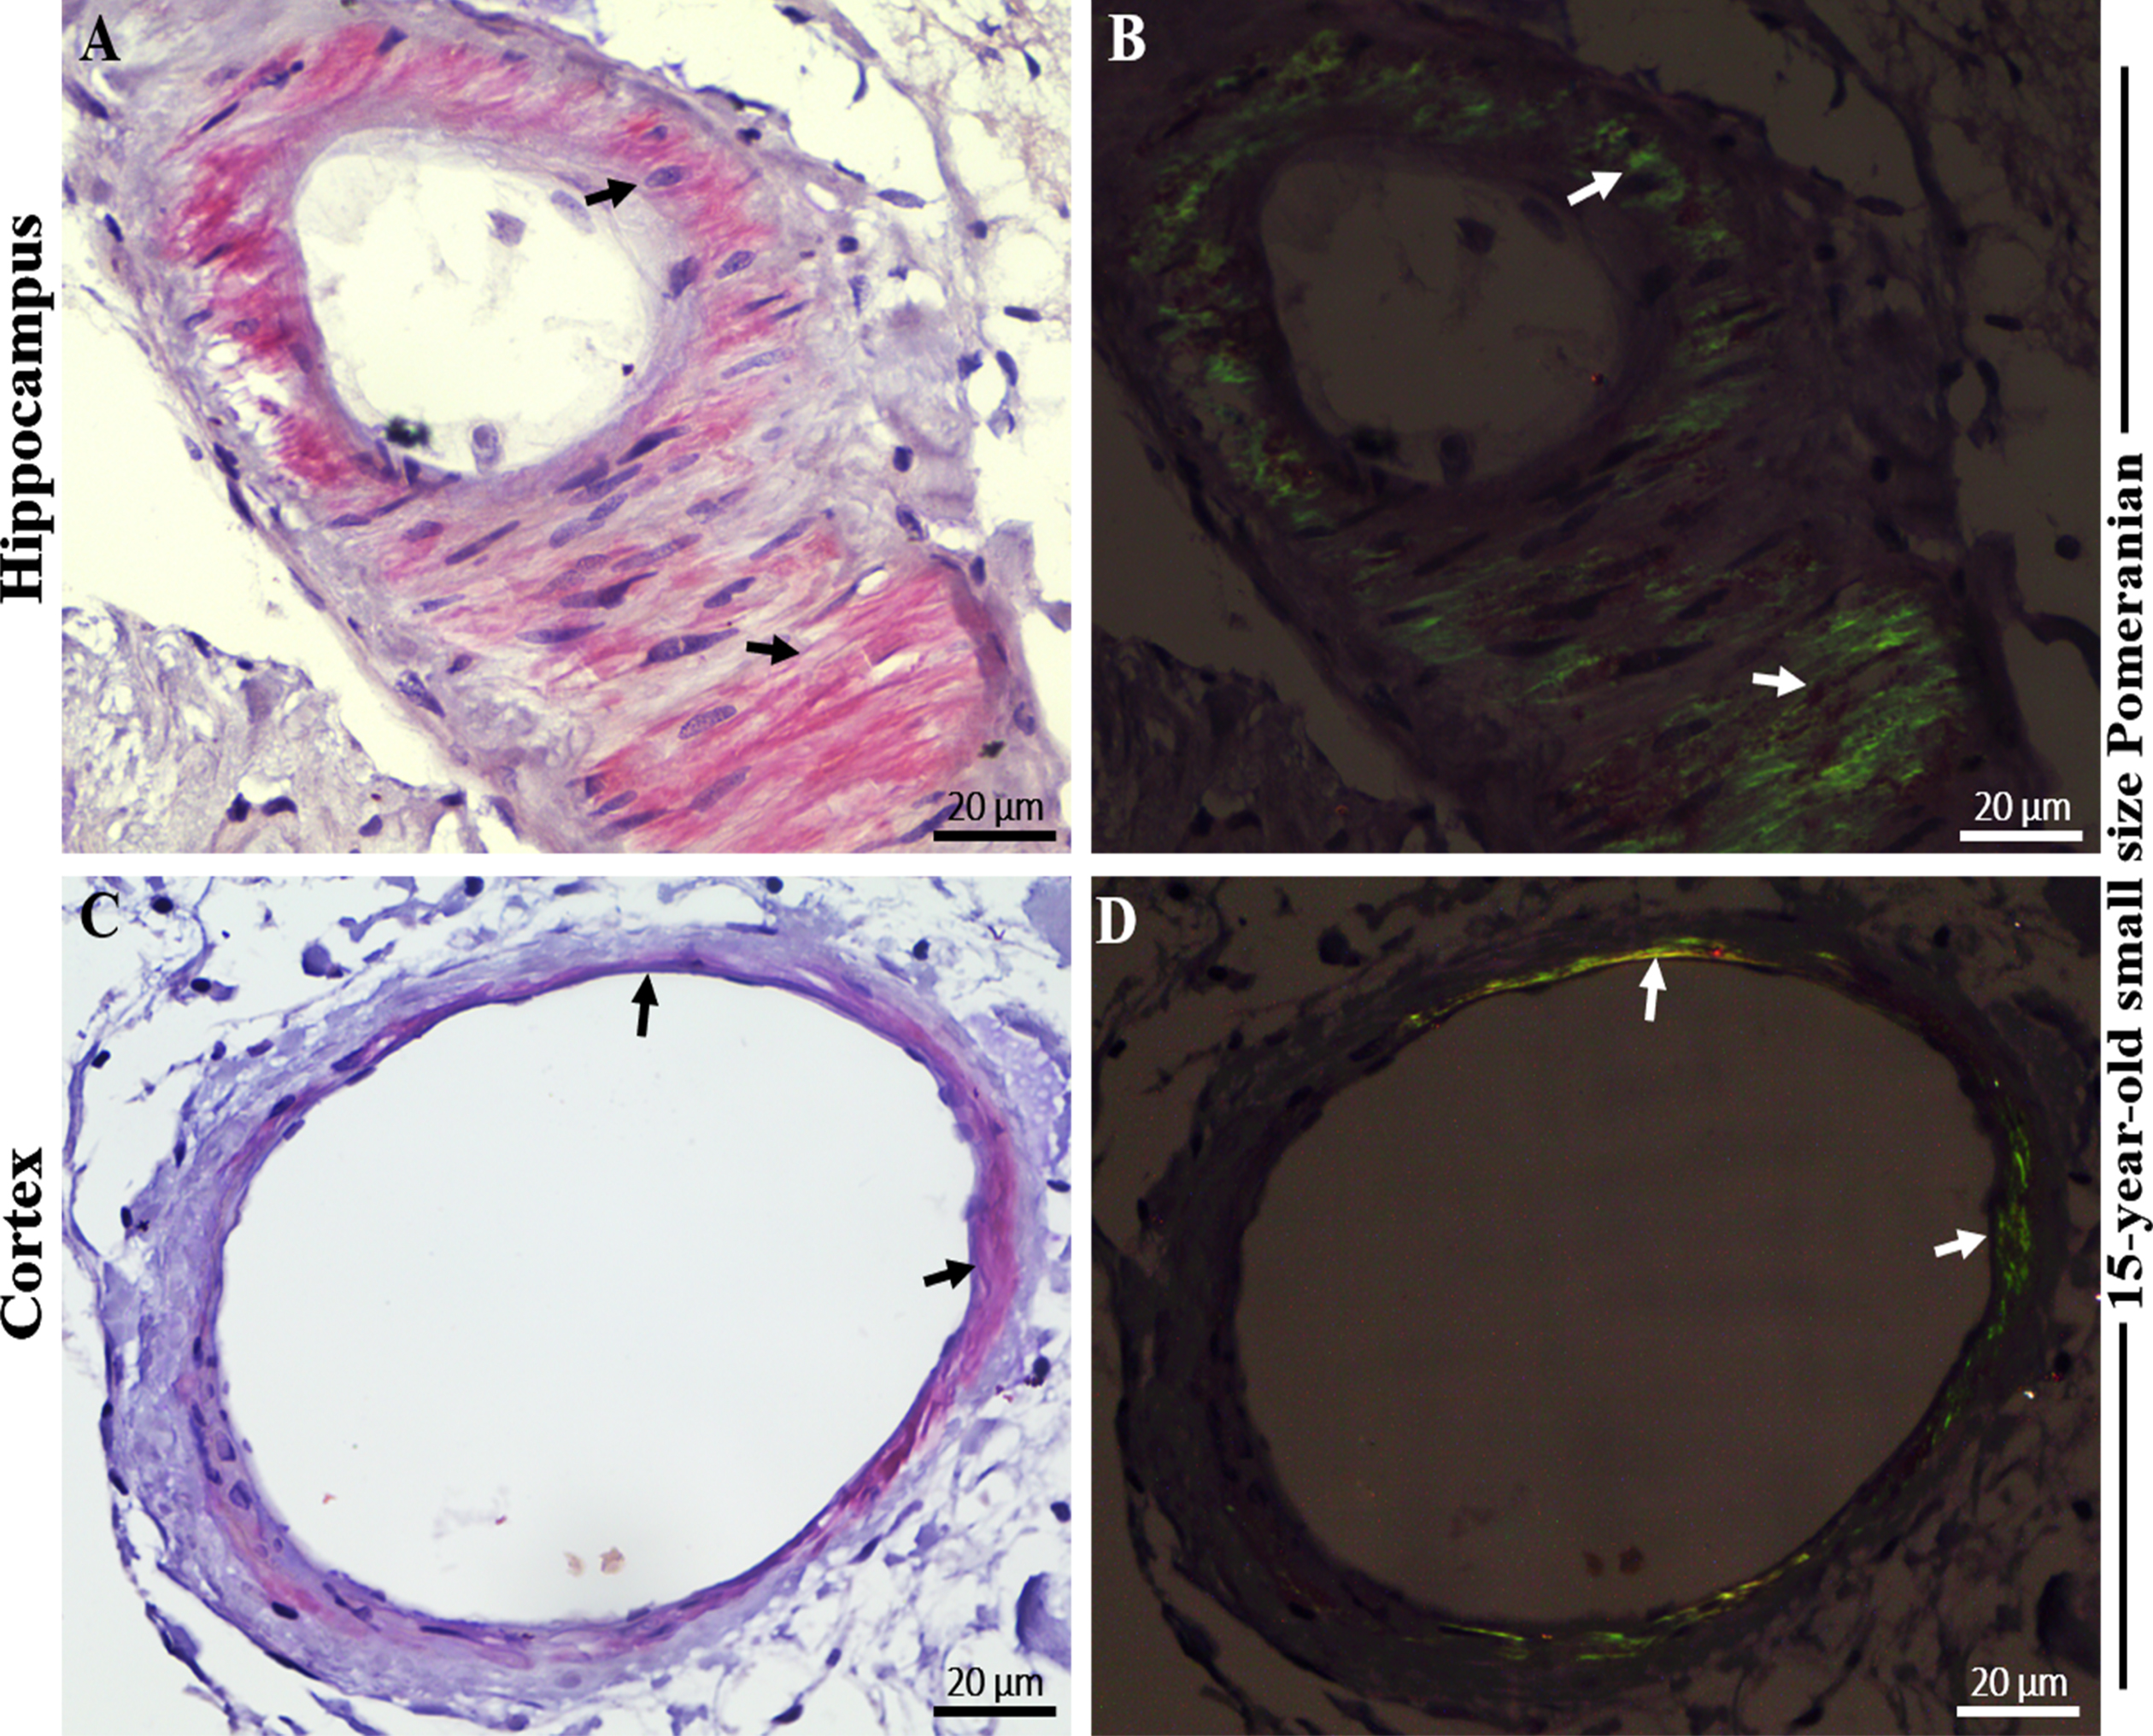 Photomicrographs of Congo red (CR) staining in cerebral amyloid angiopathy (CAA) in the brain hippocampal and cortical region of an aged dog. Distinctive red brick staining of cerebral blood vessels (largely the tunica media) (A) in the hippocampus and (C) in the frontal cortex (black arrows) of a 15-year-old small size Pomeranian following CR-hematoxylin staining. Vascular amyloid, confirming CAA, with the presence of apple-green birefringence (B) in the hippocampus and (D) in the frontal cortex (white arrows) of a 15-year-old small size Pomeranian under polarized light. Representative of all aged dogs. Scale bar = 20μm.